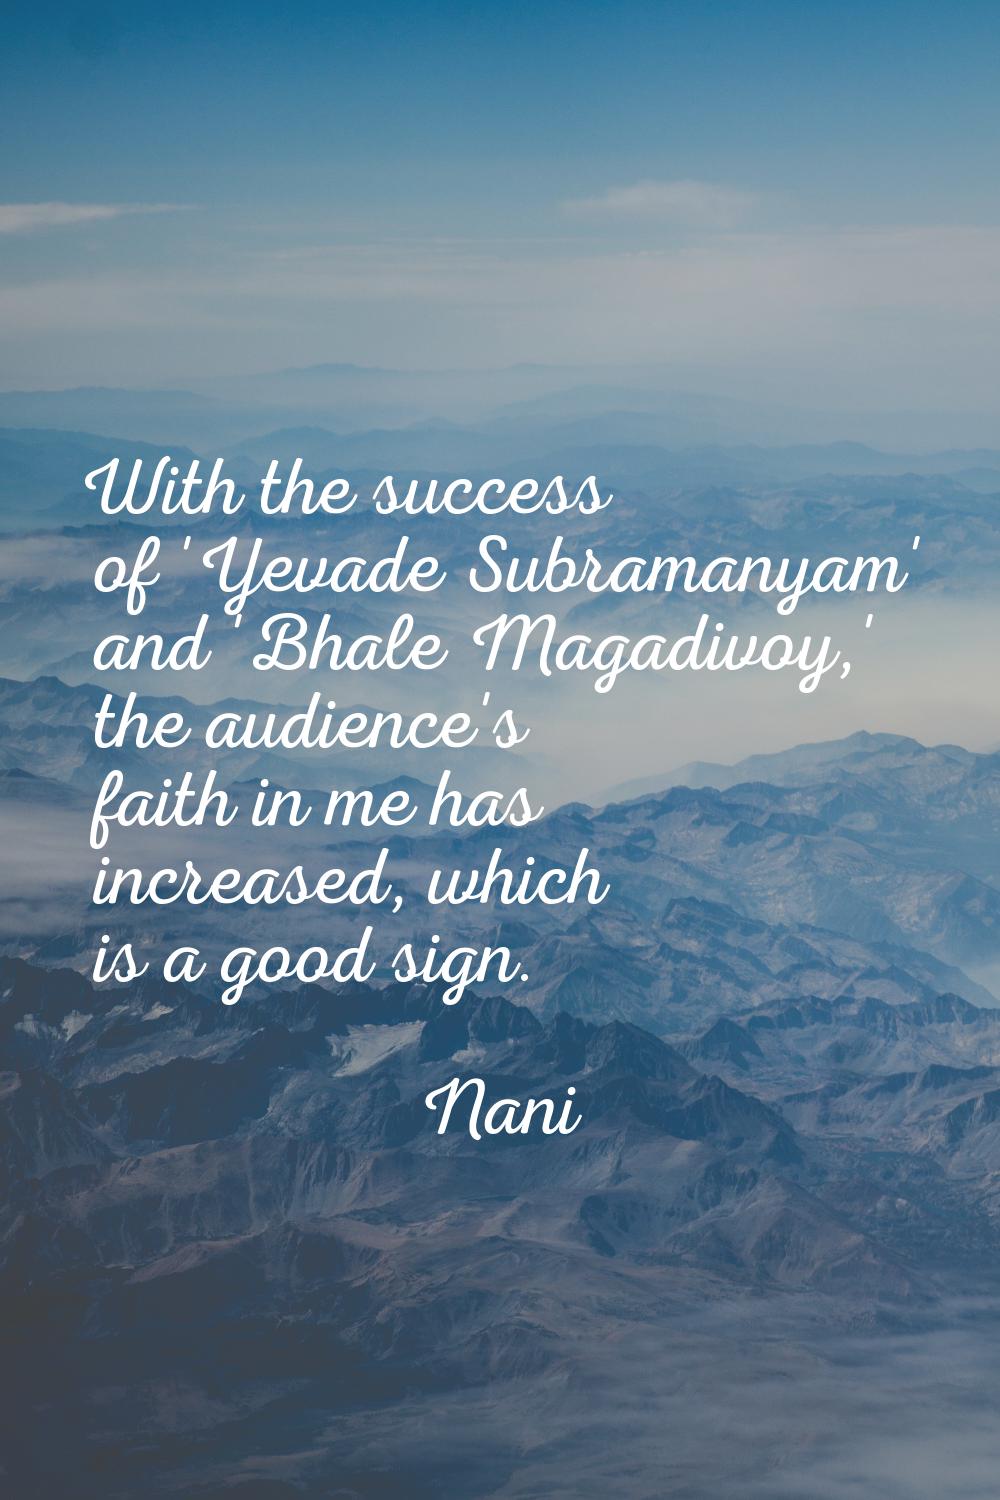 With the success of 'Yevade Subramanyam' and 'Bhale Magadivoy,' the audience's faith in me has incr